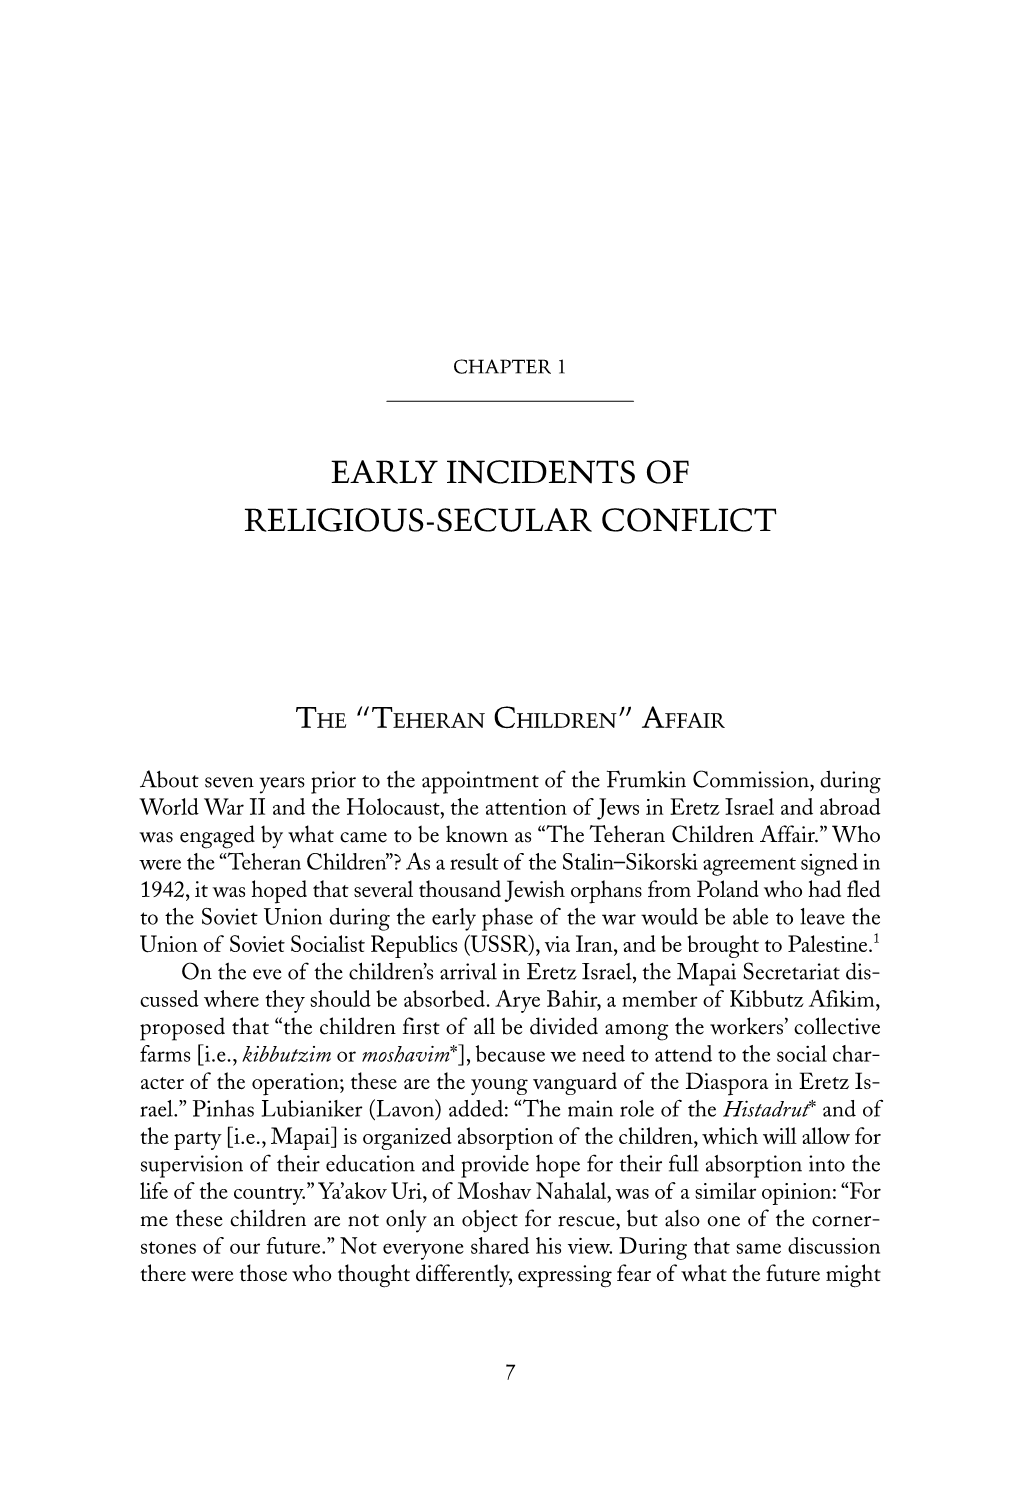 Early Incidents of Religious-Secular Conflict